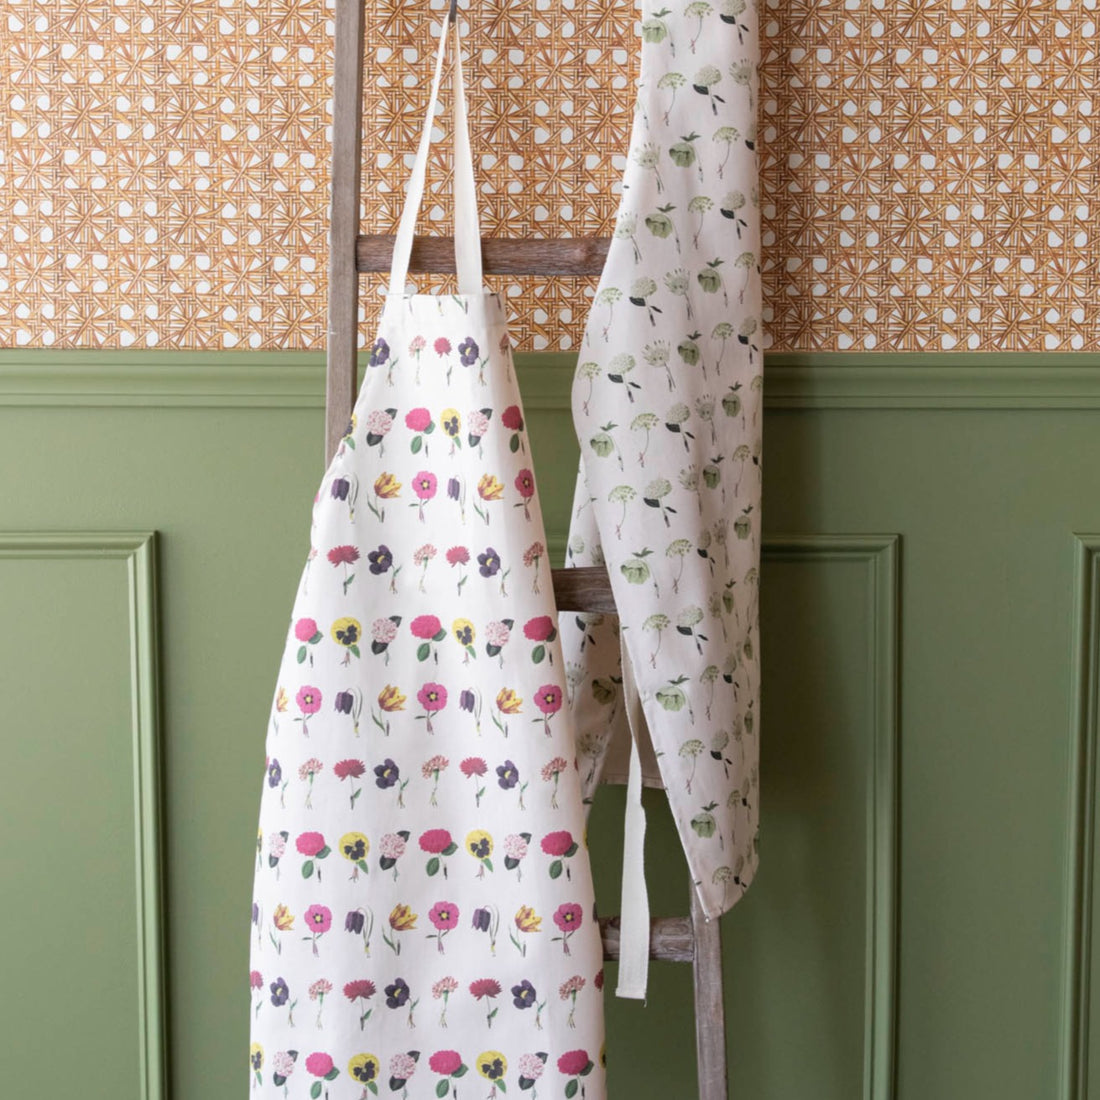 Two Laura Stoddart Aprons by Hester &amp; Cook hanging on a wooden ladder against a wall with patterned wallpaper above wainscoting.